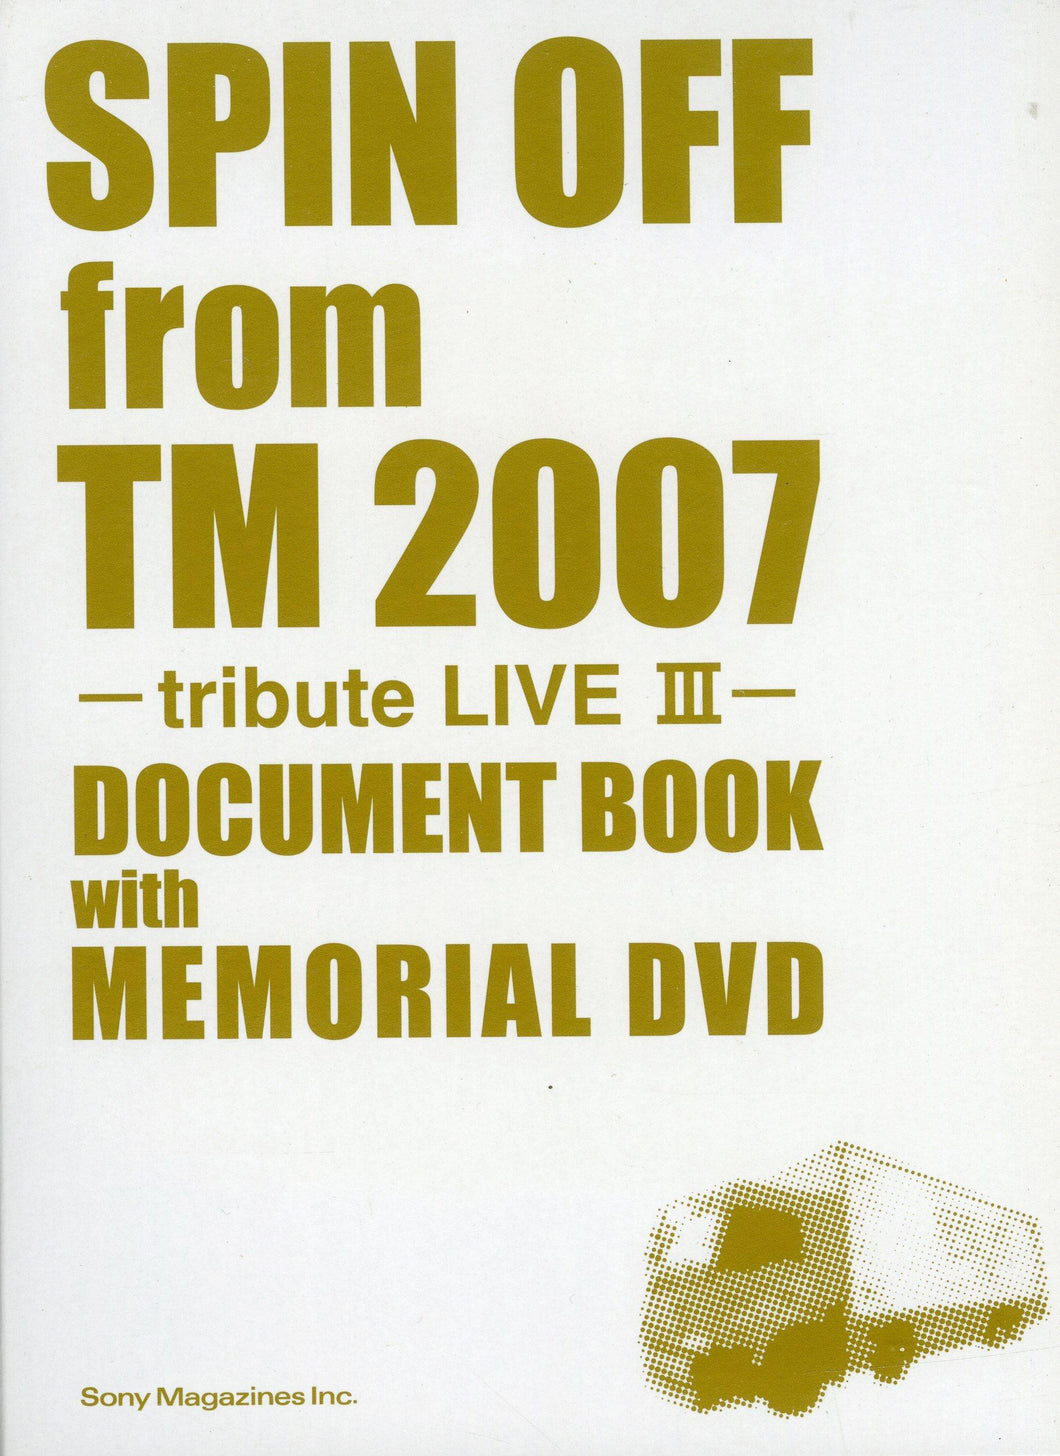 SPIN OFF from TM 2007 tribute LIVE Ⅲ DOCUMENT BOOK with MEMORIAL DVD